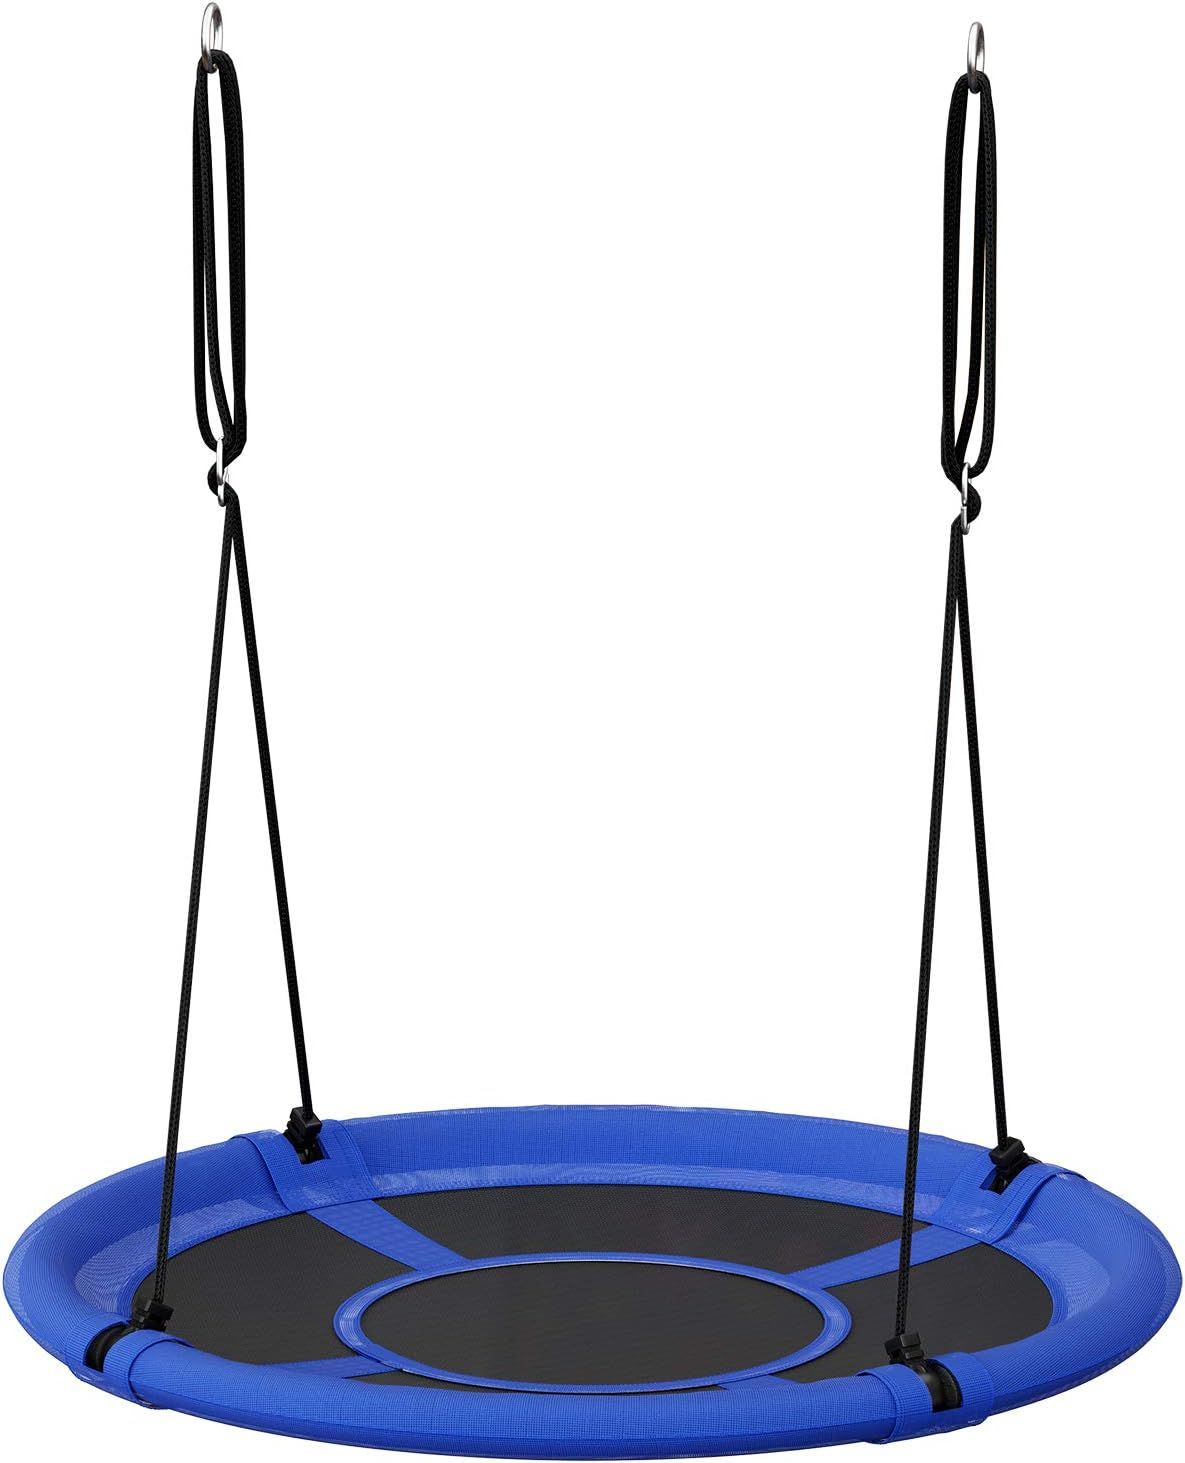 SONGMICS Saucer Tree Swing, 40 Inch, 700 lb Load, Includes Hanging Kit, Blue and Black UGSW001Q01 | Amazon (US)